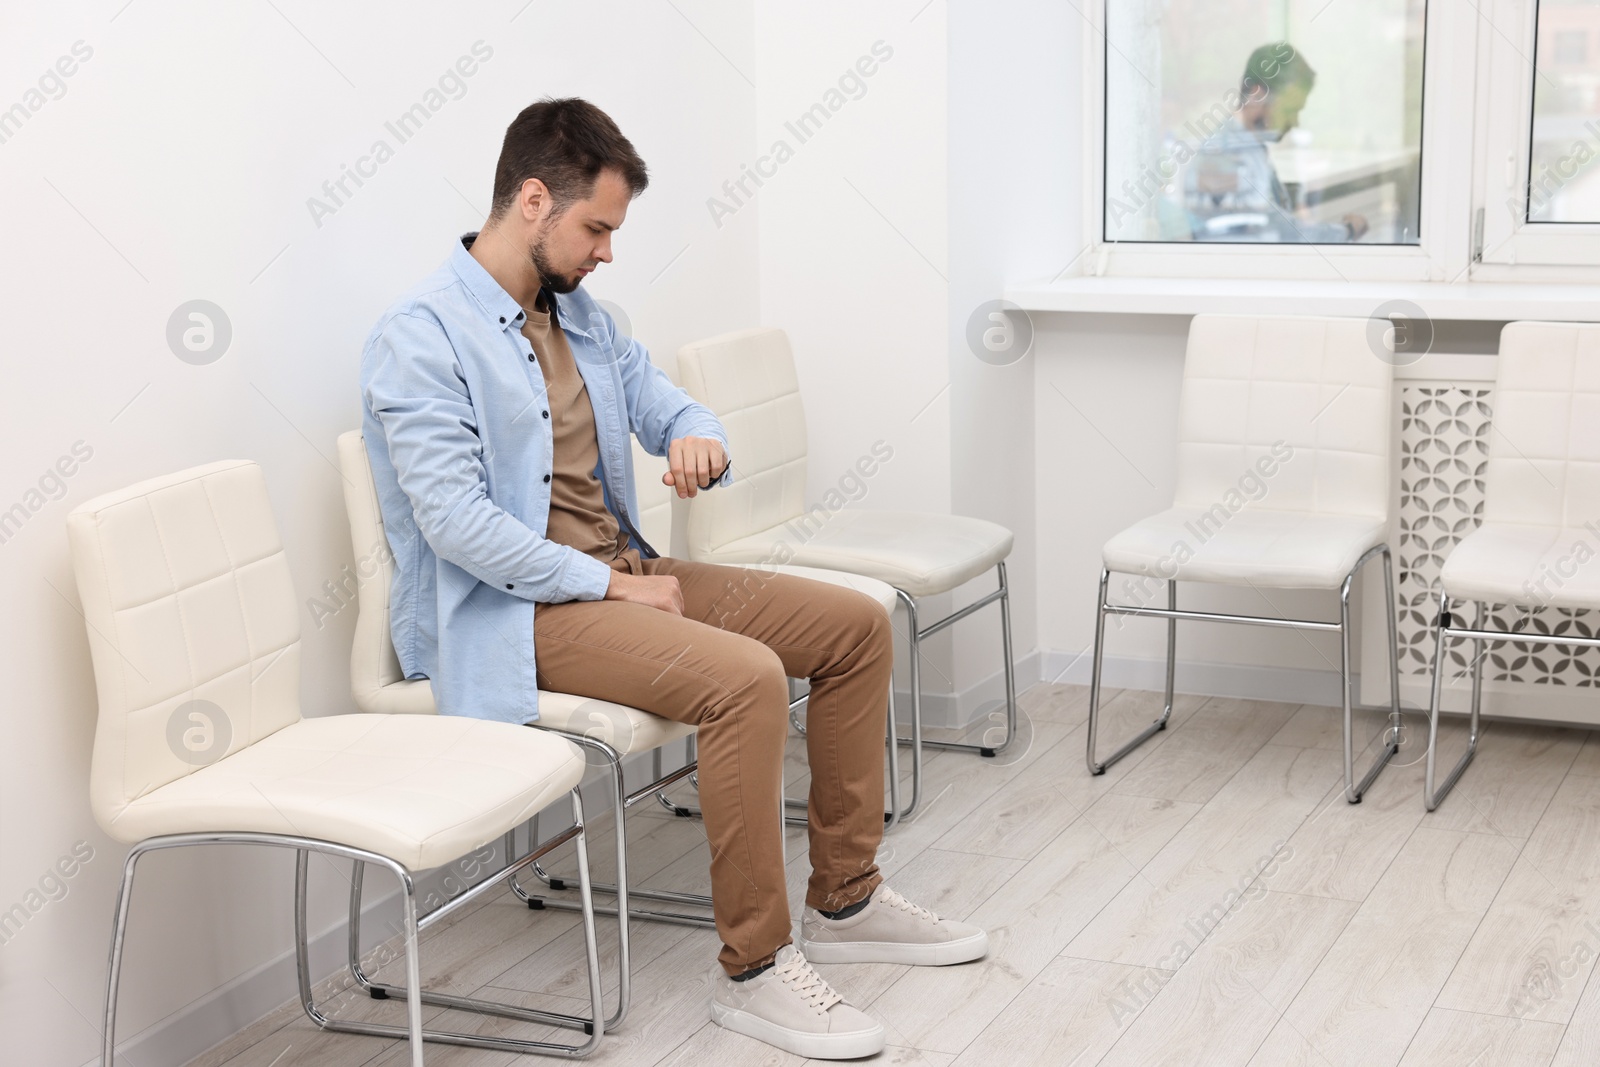 Photo of Man looking at wrist watch and waiting for job interview indoors